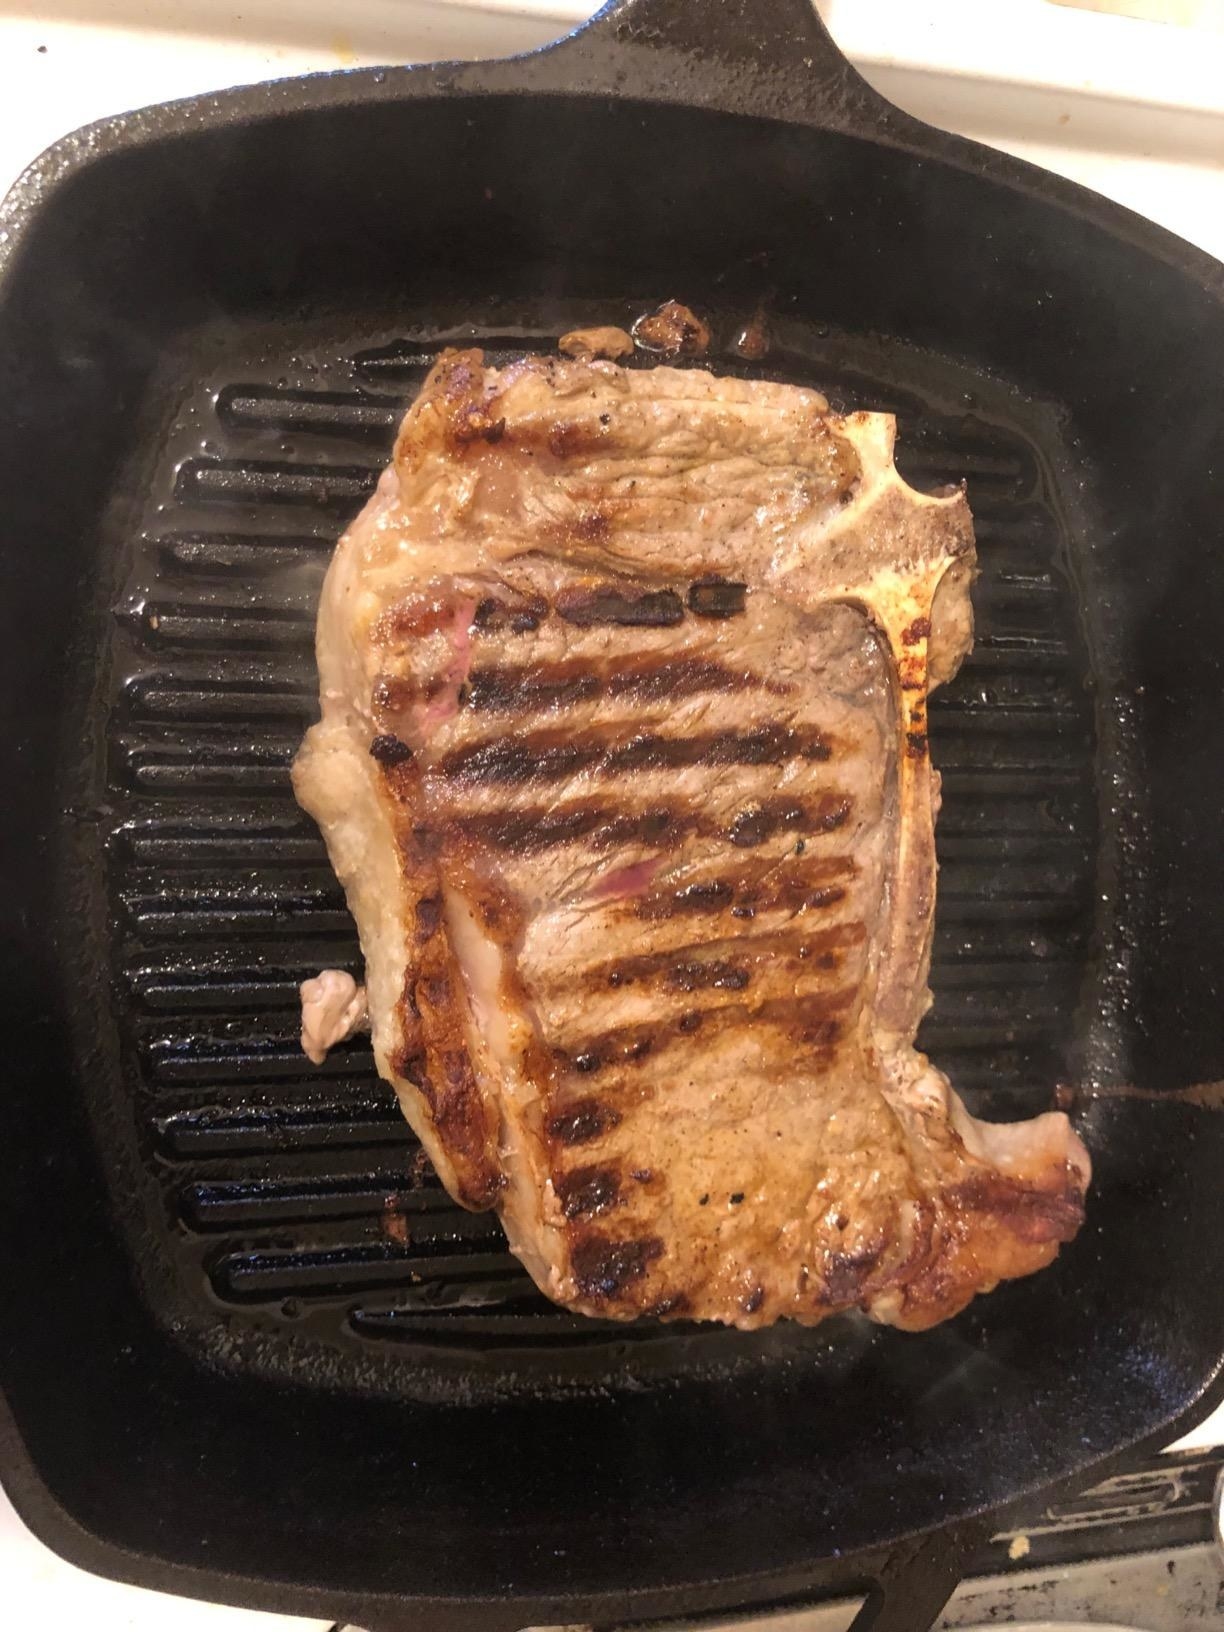 A reviewer cooking a steak in the pan, with grill marks